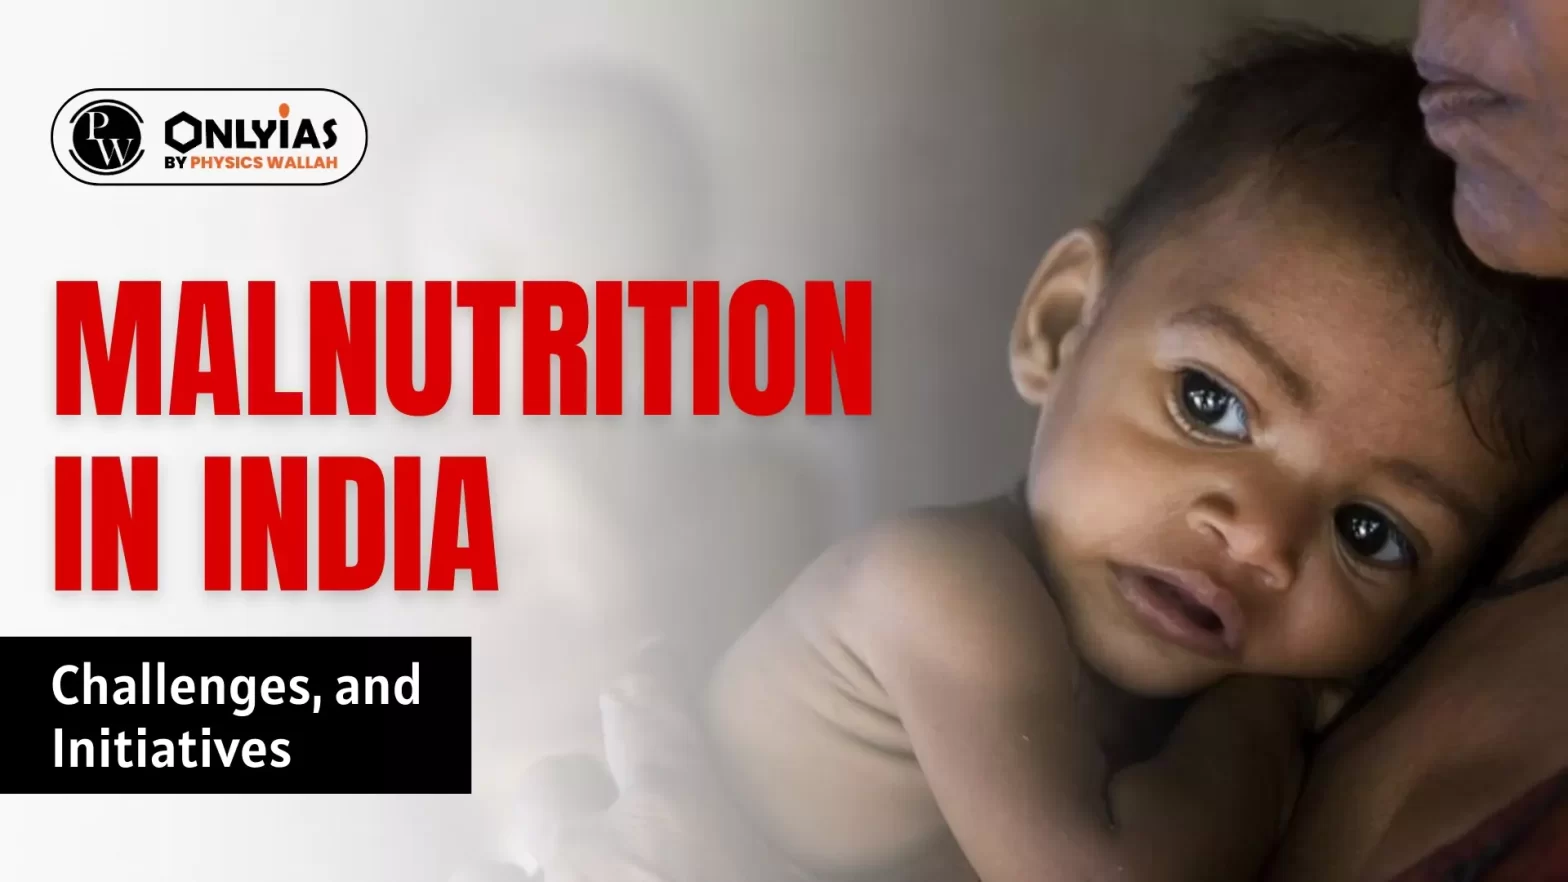 Malnutrition in India: Challenges, and Initiatives